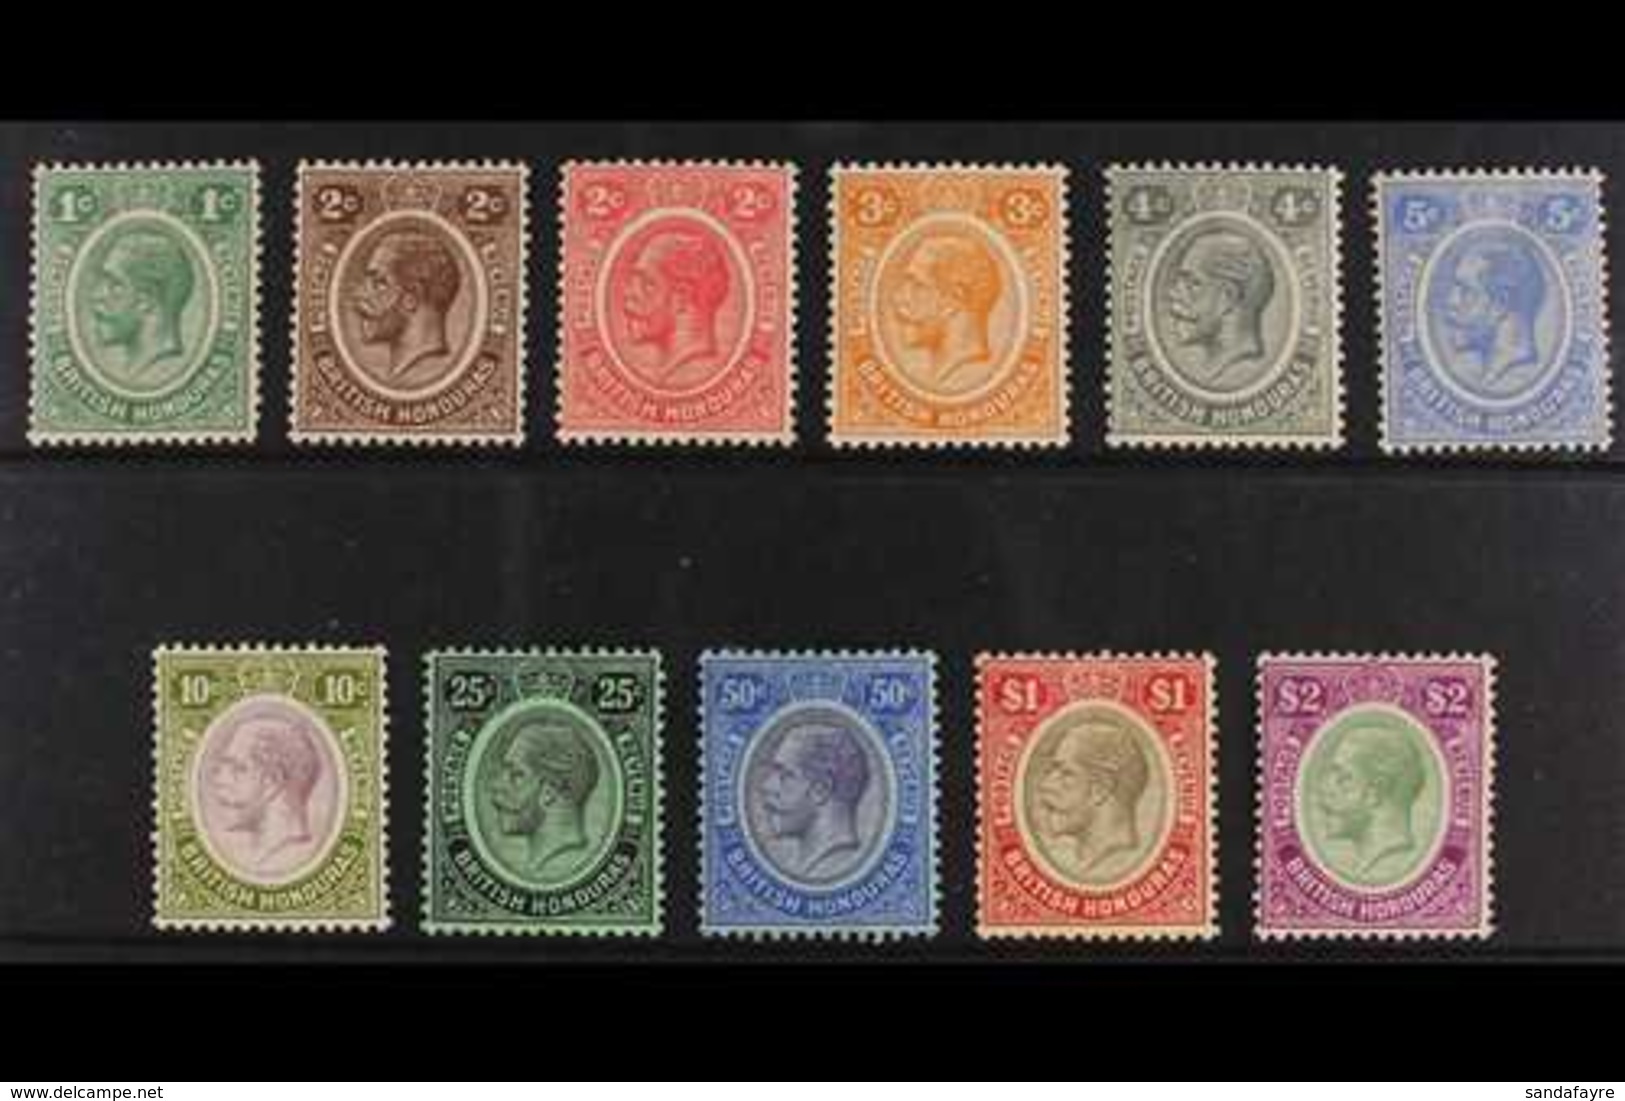 1922-33 KGV Watermark SCA Complete Set, SG 126/37, Fine Mint, Fresh Colours. (11 Stamps) For More Images, Please Visit H - British Honduras (...-1970)